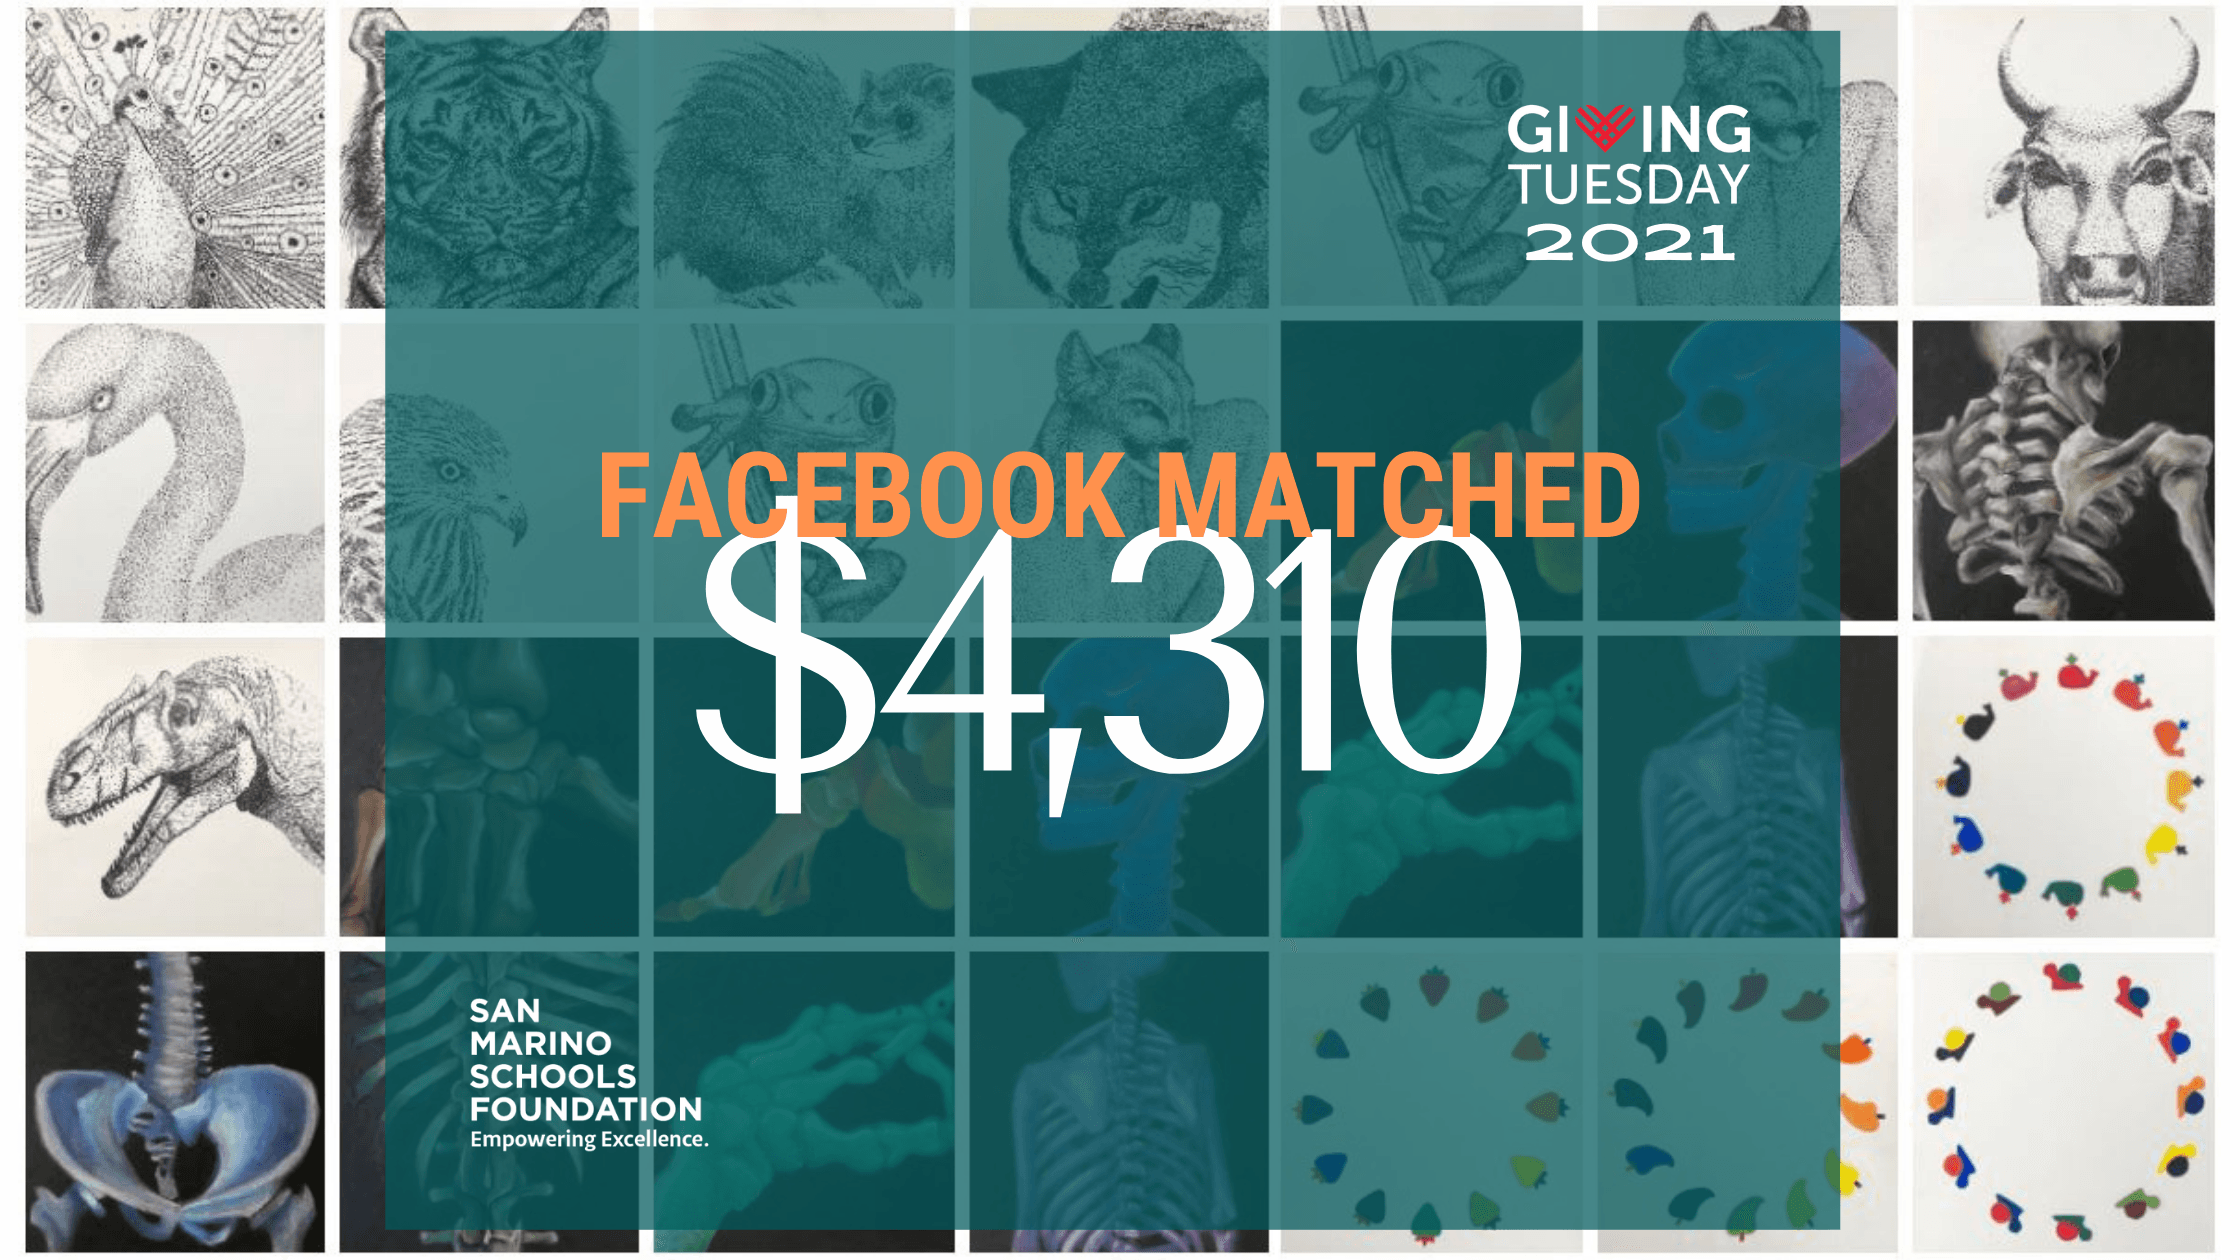 SMSF Received Biggest Ever Facebook Match for #GivingTuesday2021 Campaign